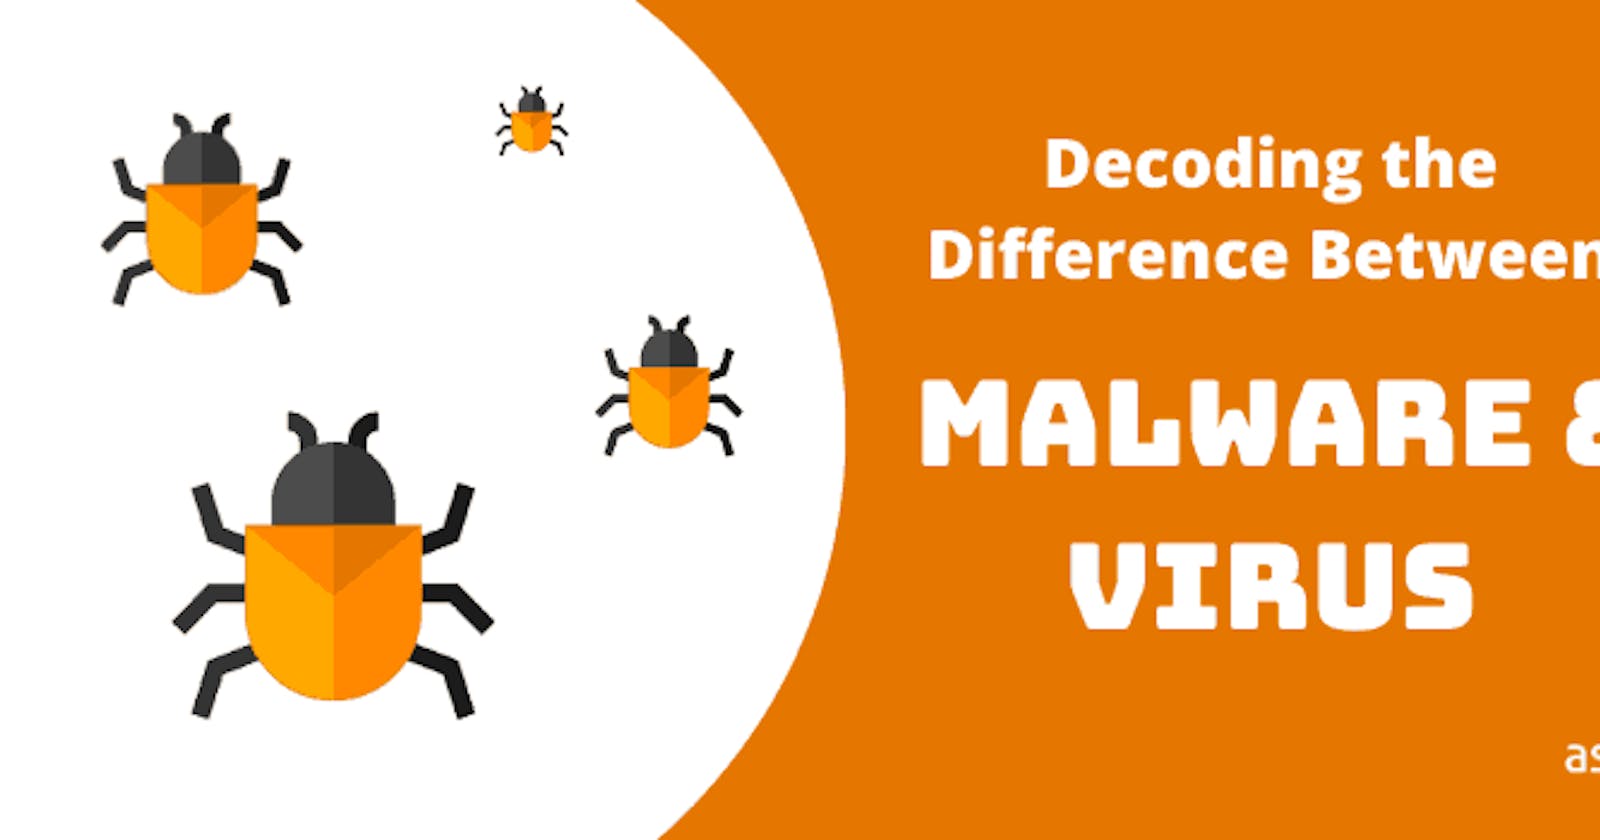 Differences between Malware and Virus.